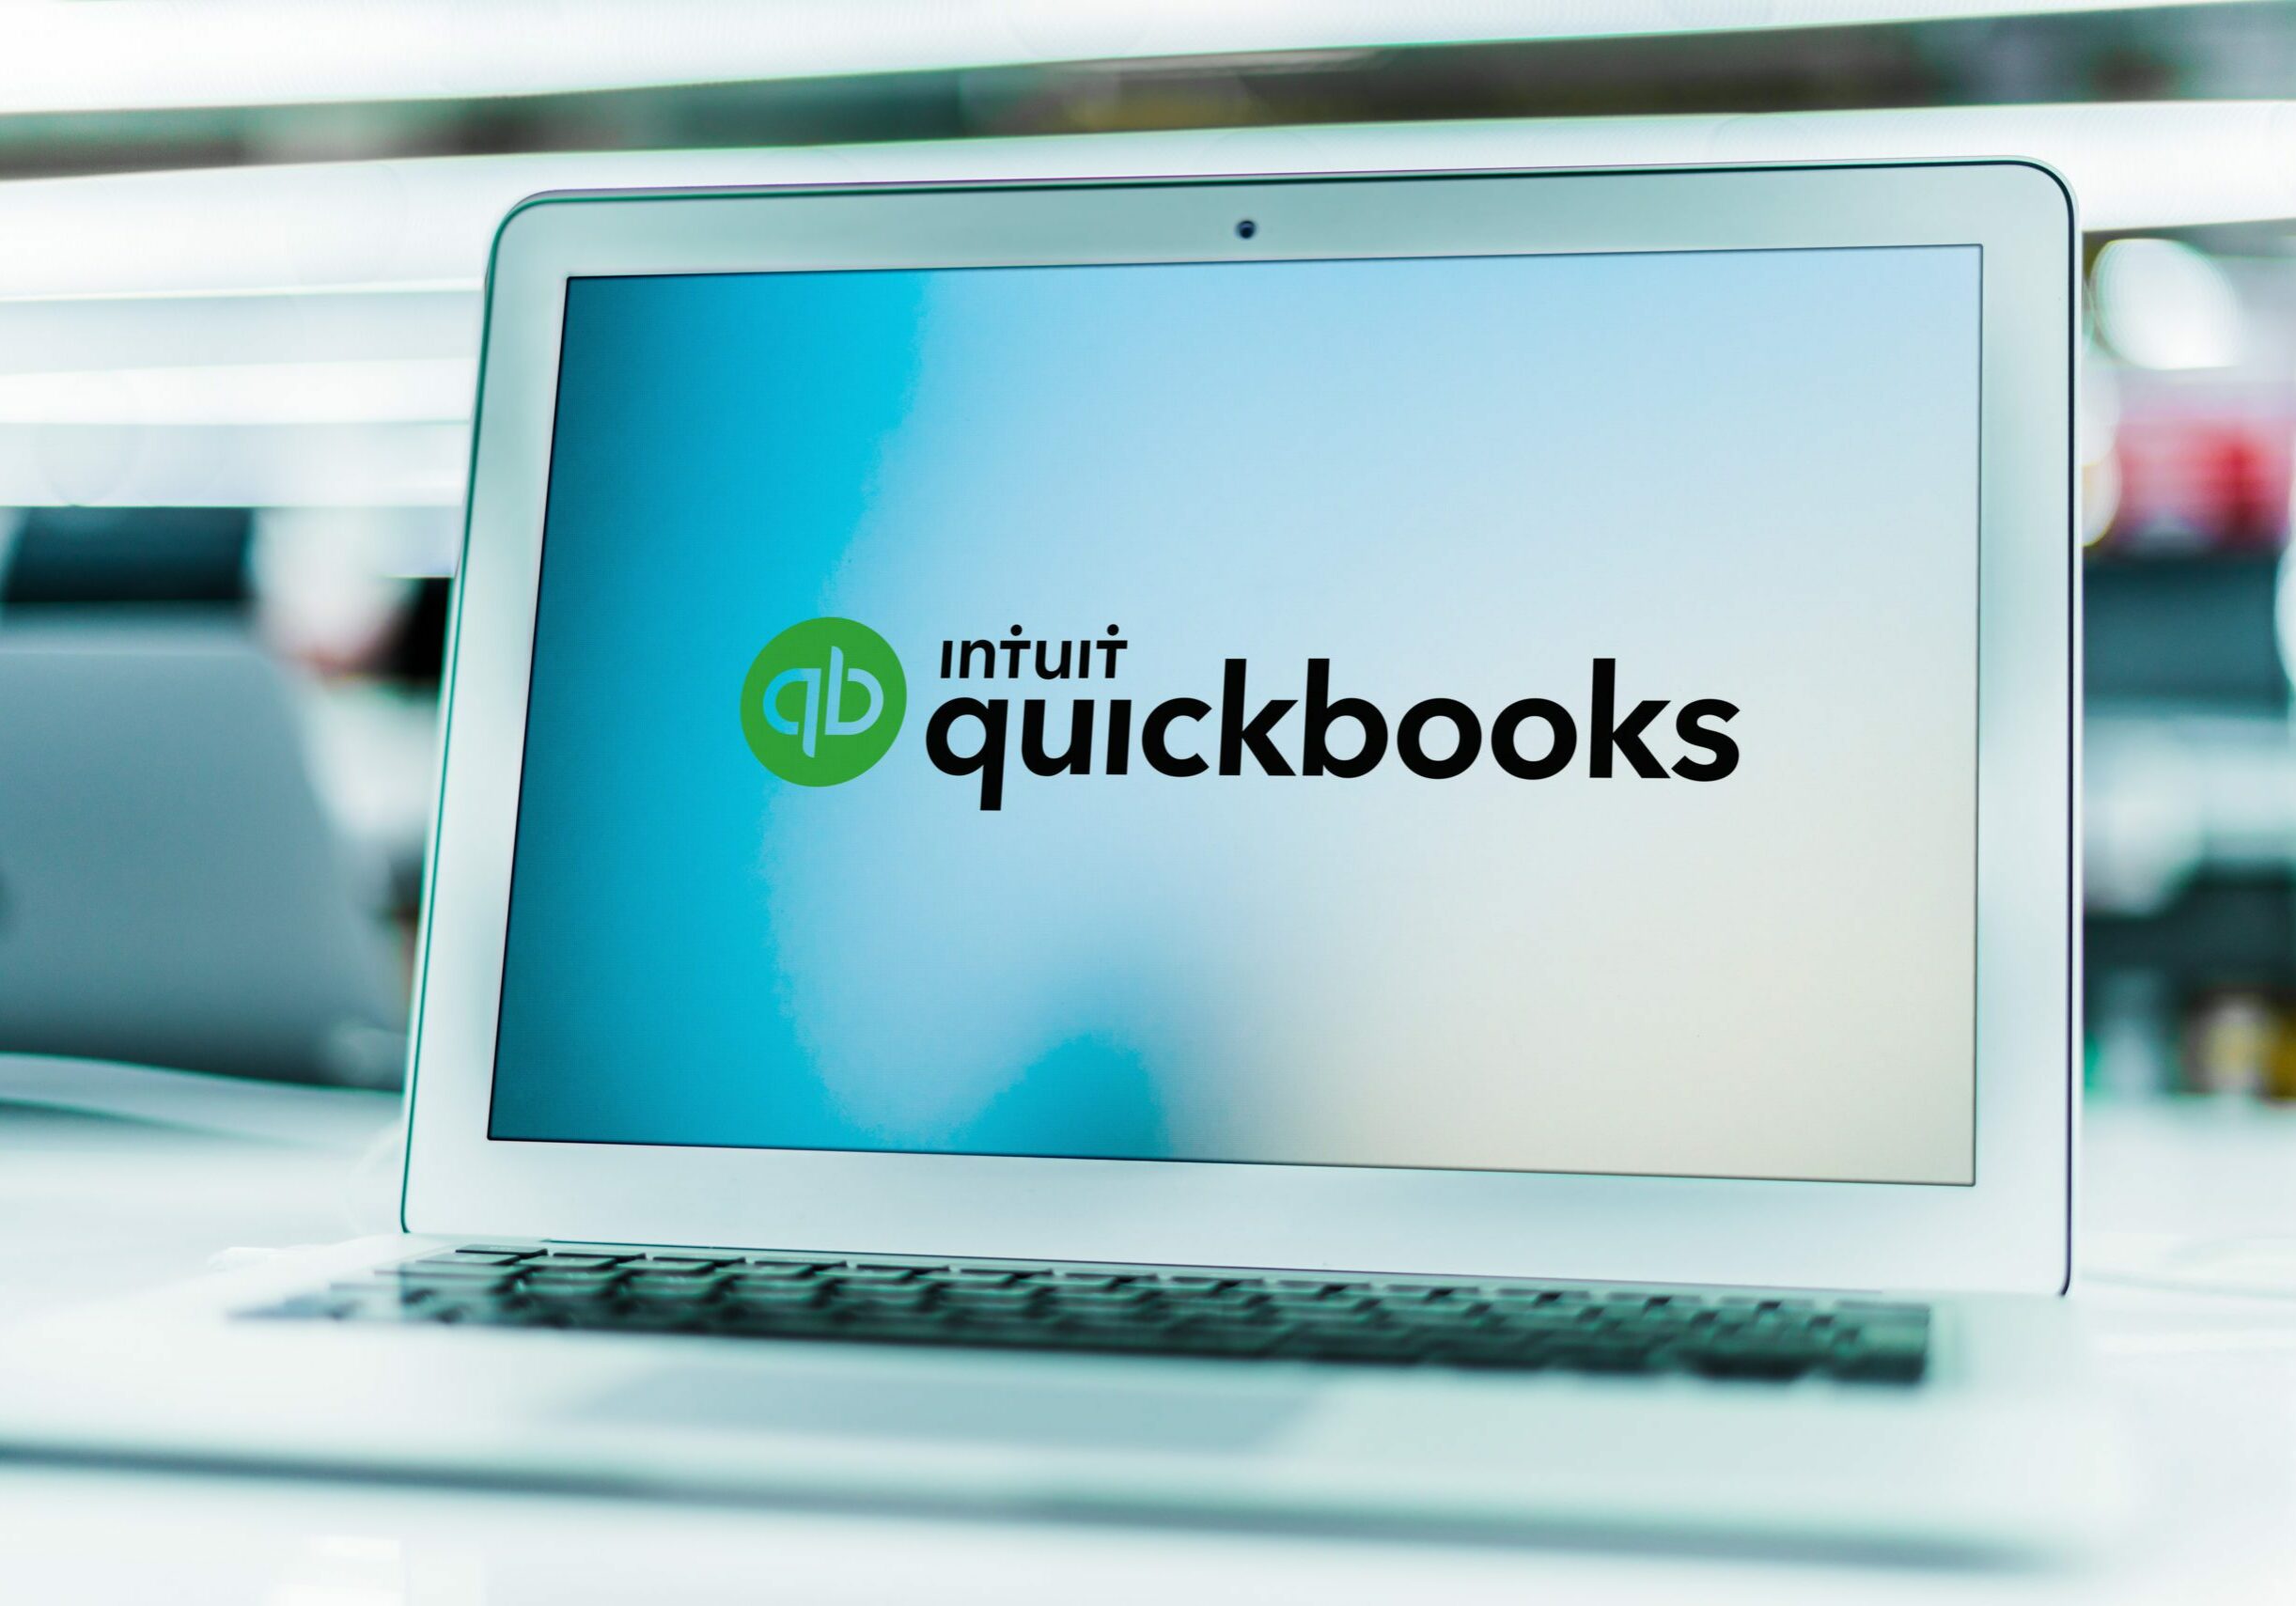 POZNAN, POL - JUN 16, 2020: Laptop computer displaying logo of QuickBooks, an accounting software package developed and marketed by Intuit